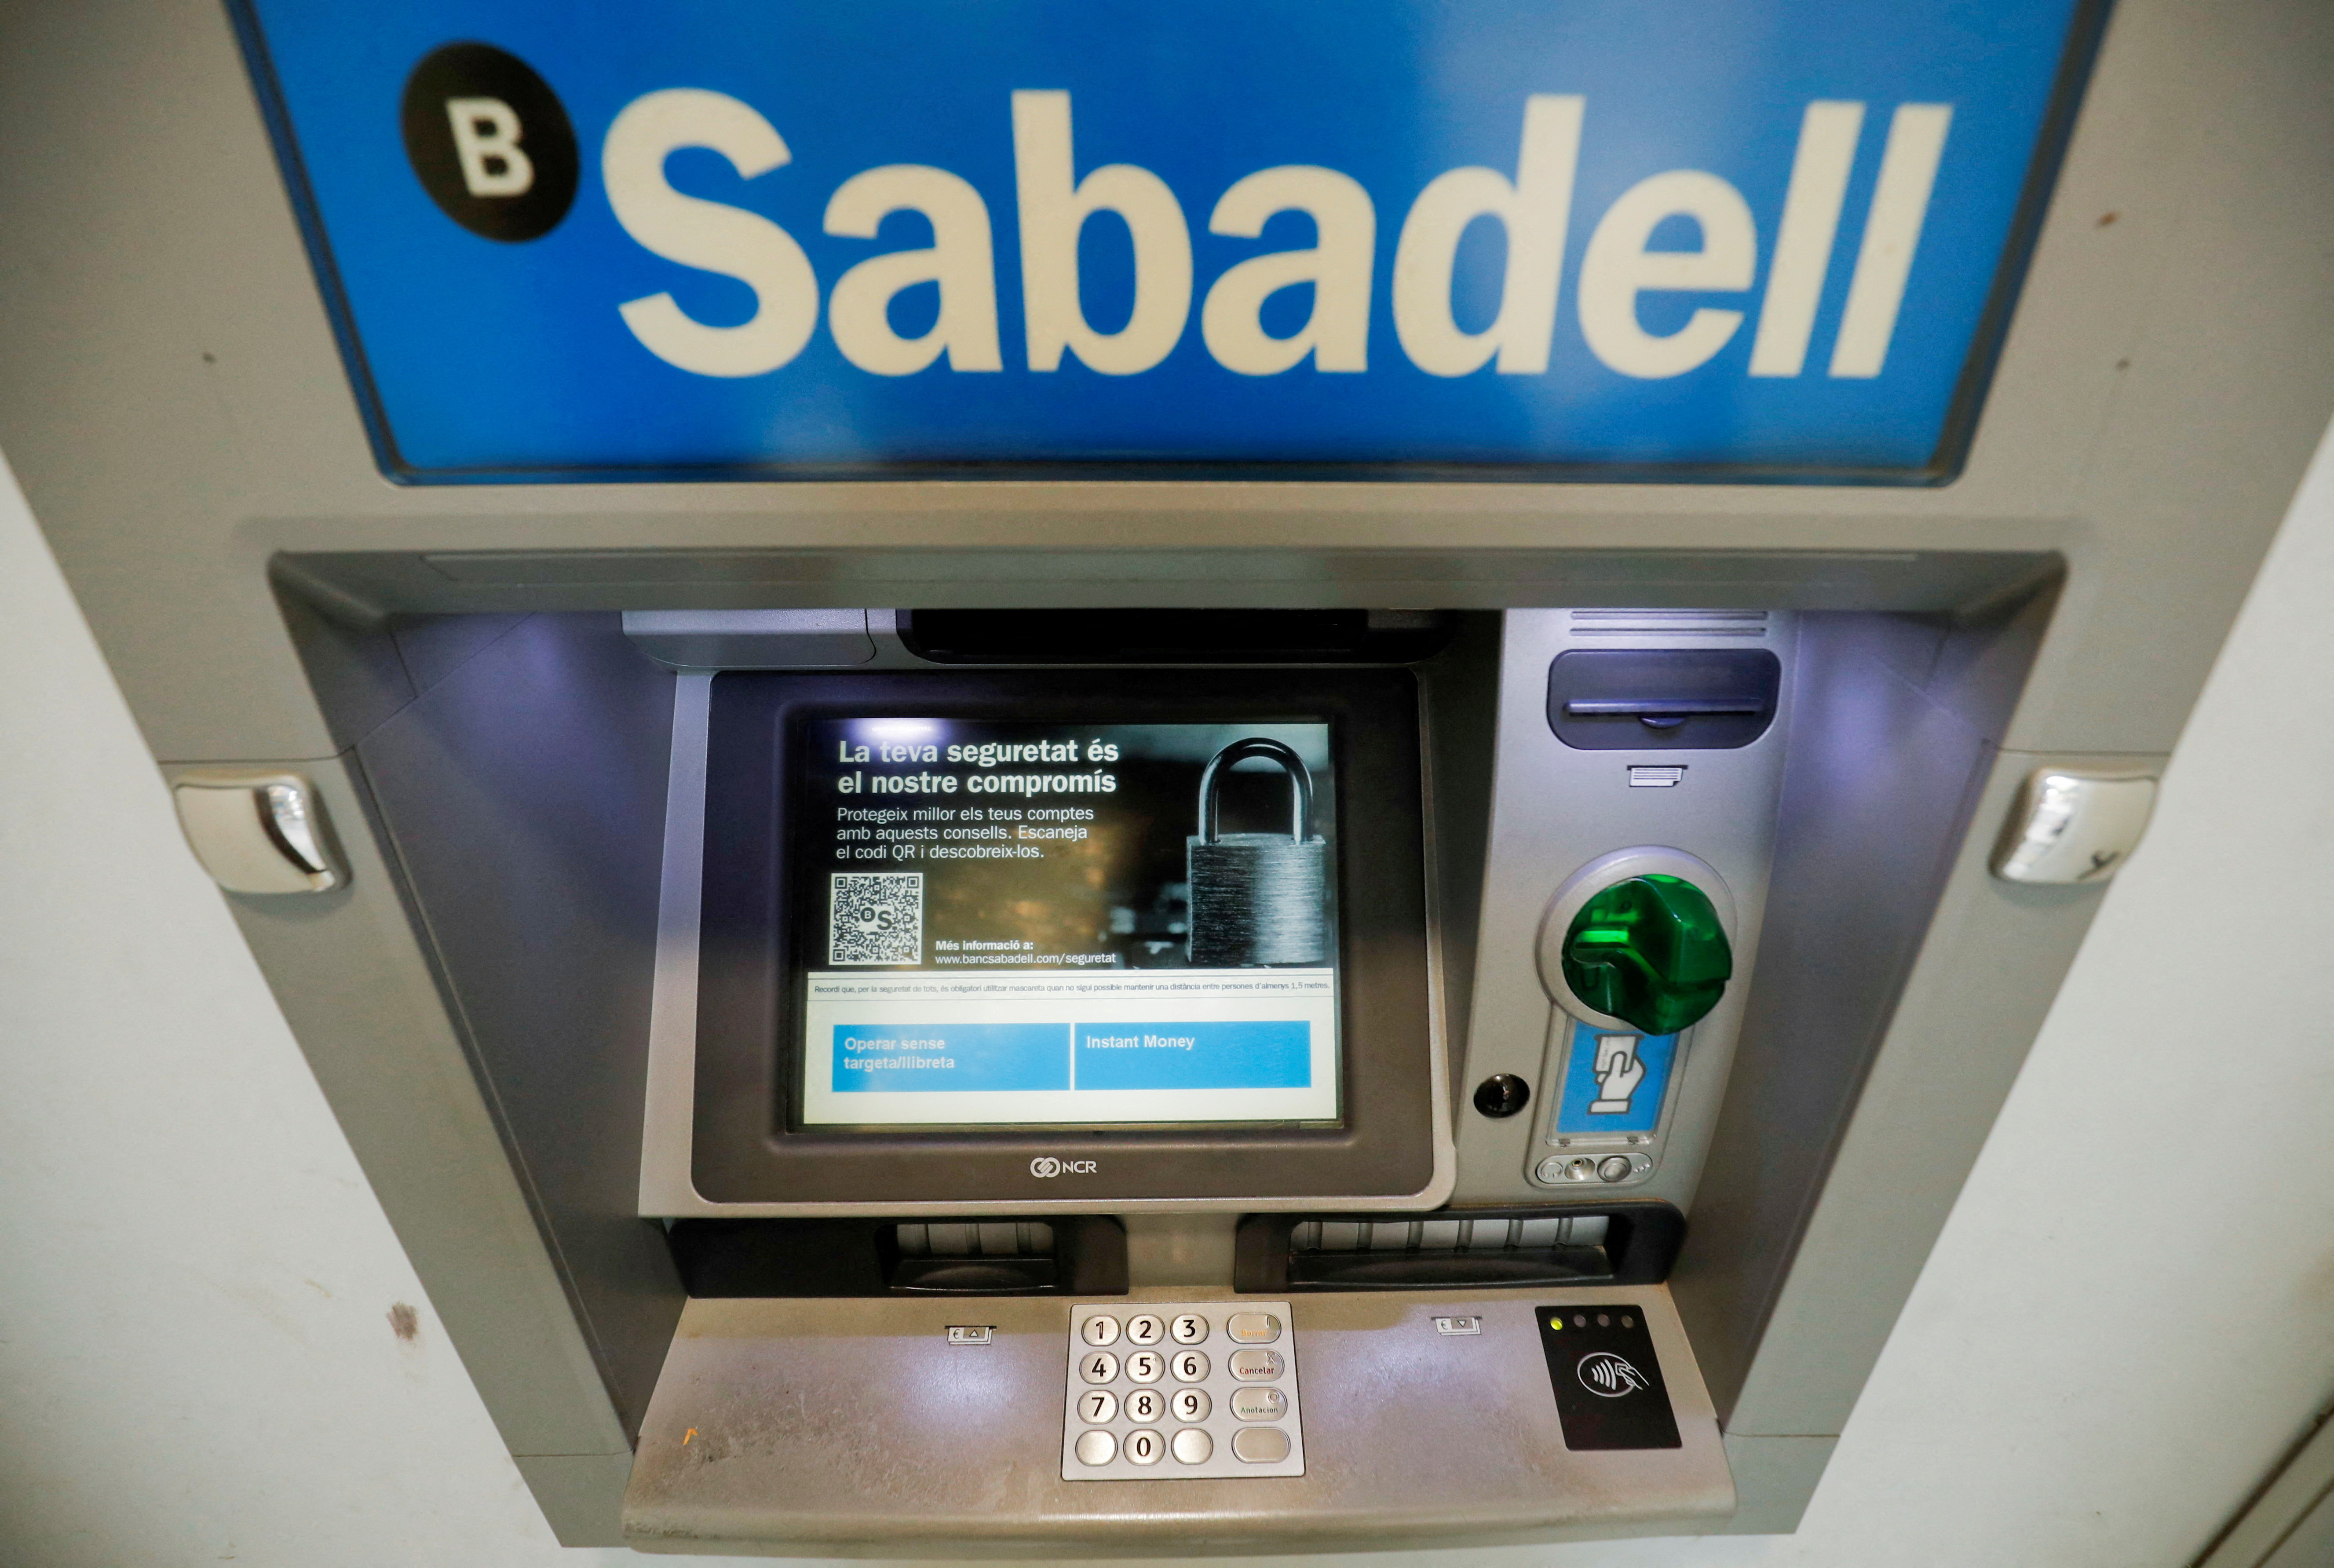 Sabadell bank's logo is seen at an ATM machine outside an office in Barcelona, Spain